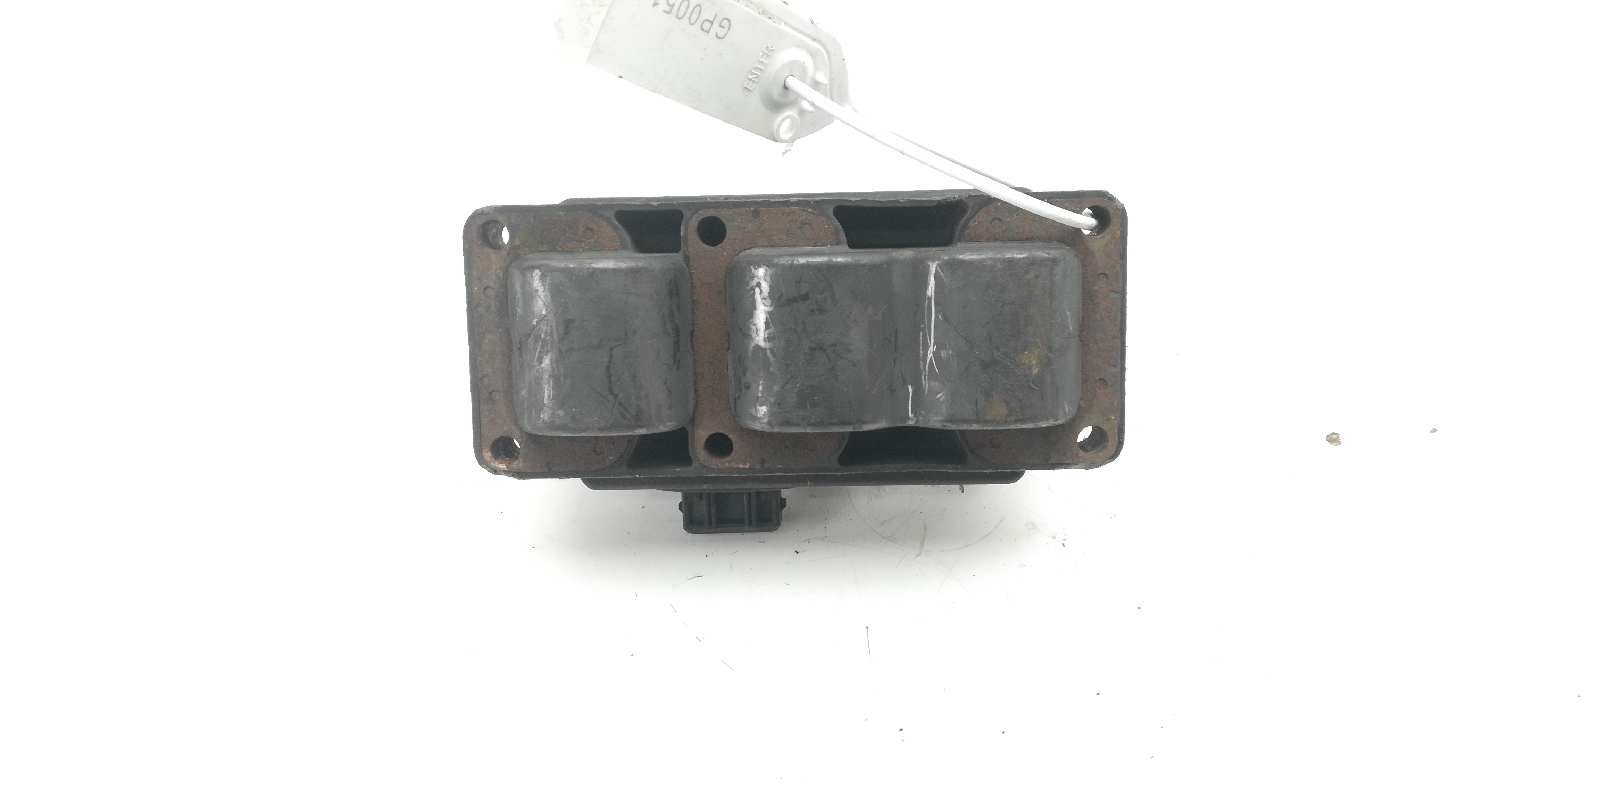 OPEL Vectra A (1988-1995) High Voltage Ignition Coil 0221503002 18496139